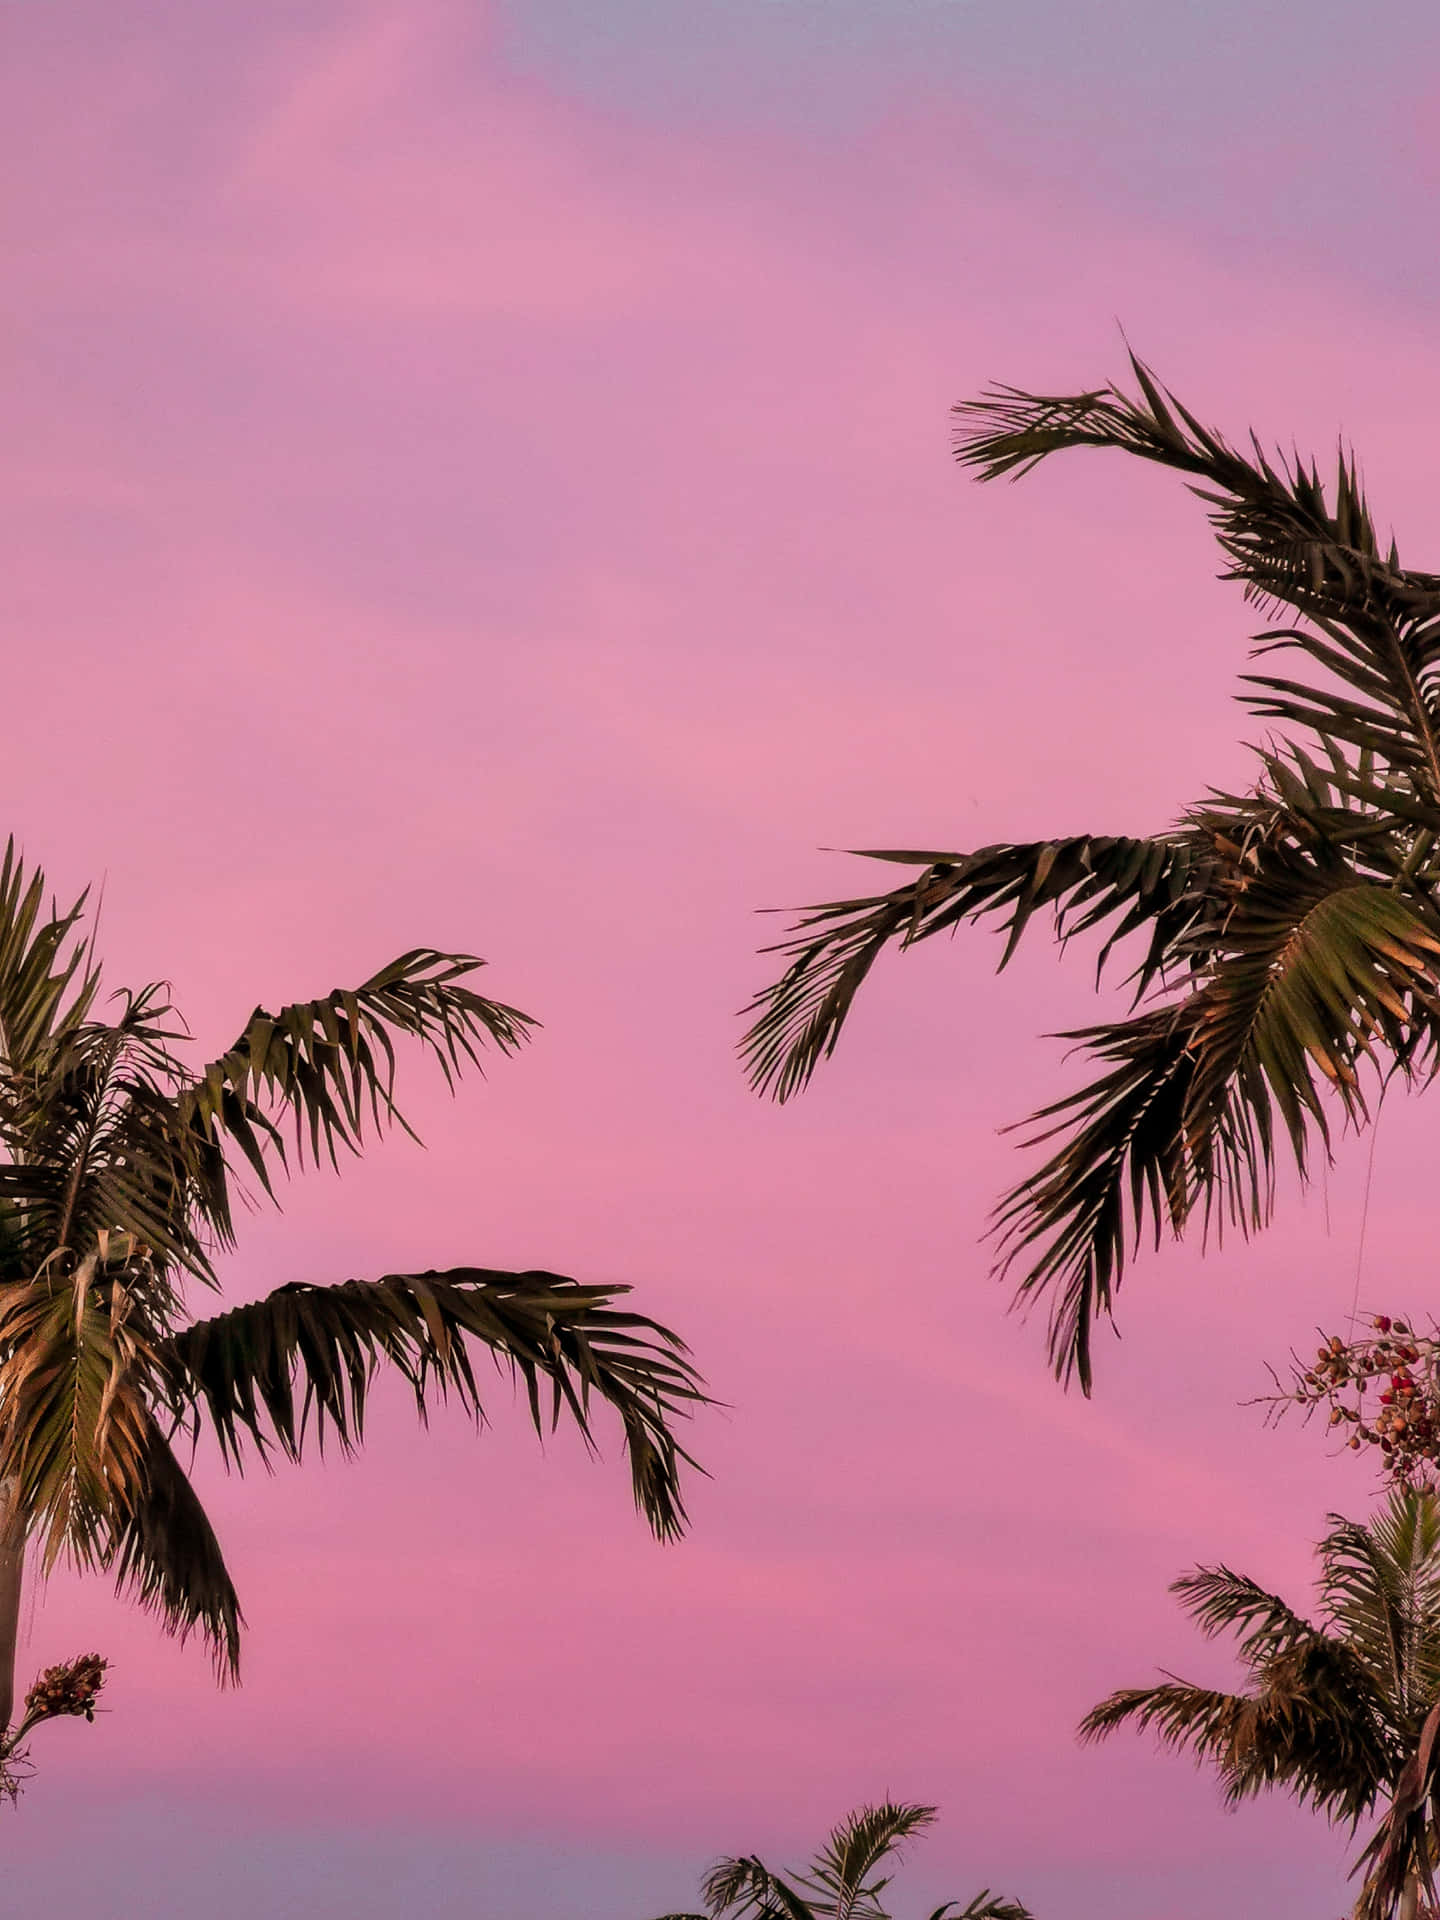 "A beautiful pink sky sets the backdrop of a peaceful summer evening."